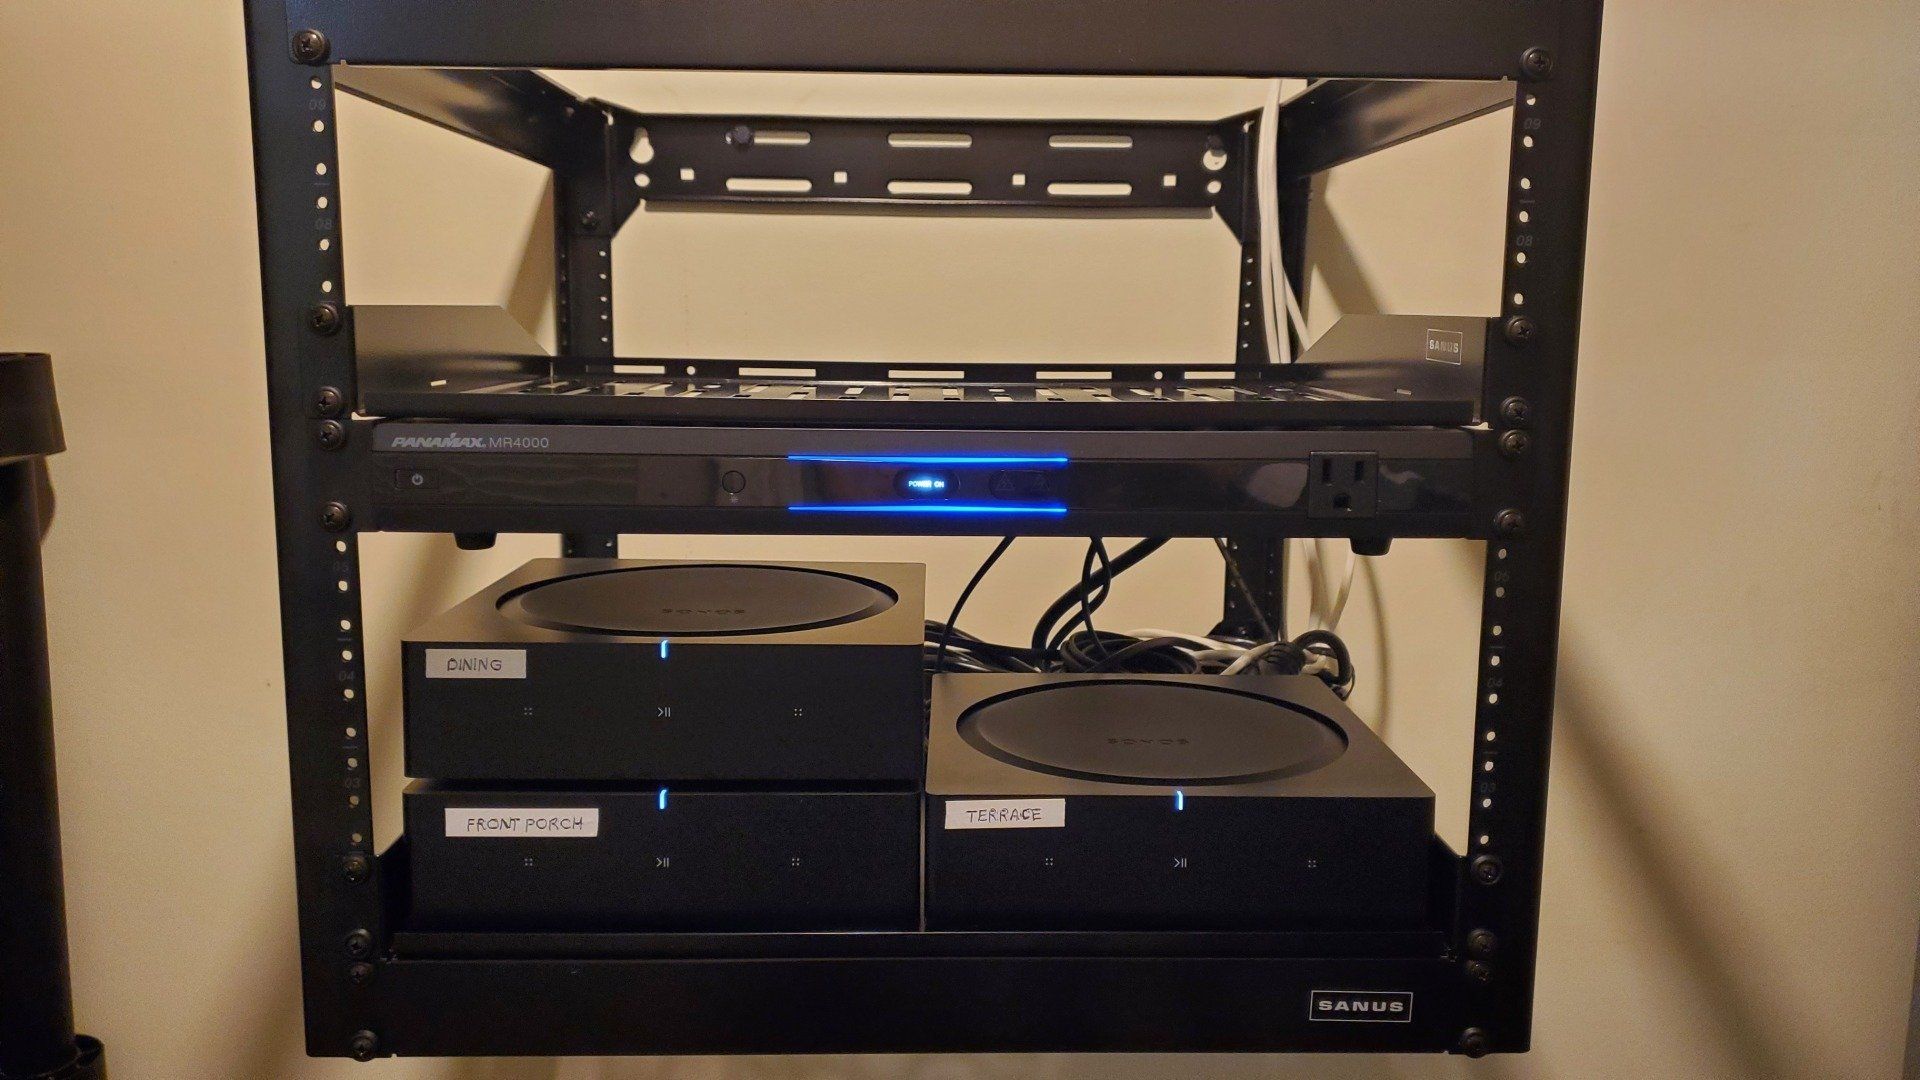 a home network rack with audio amplifiers installed by fisher electronics in northern ohio.